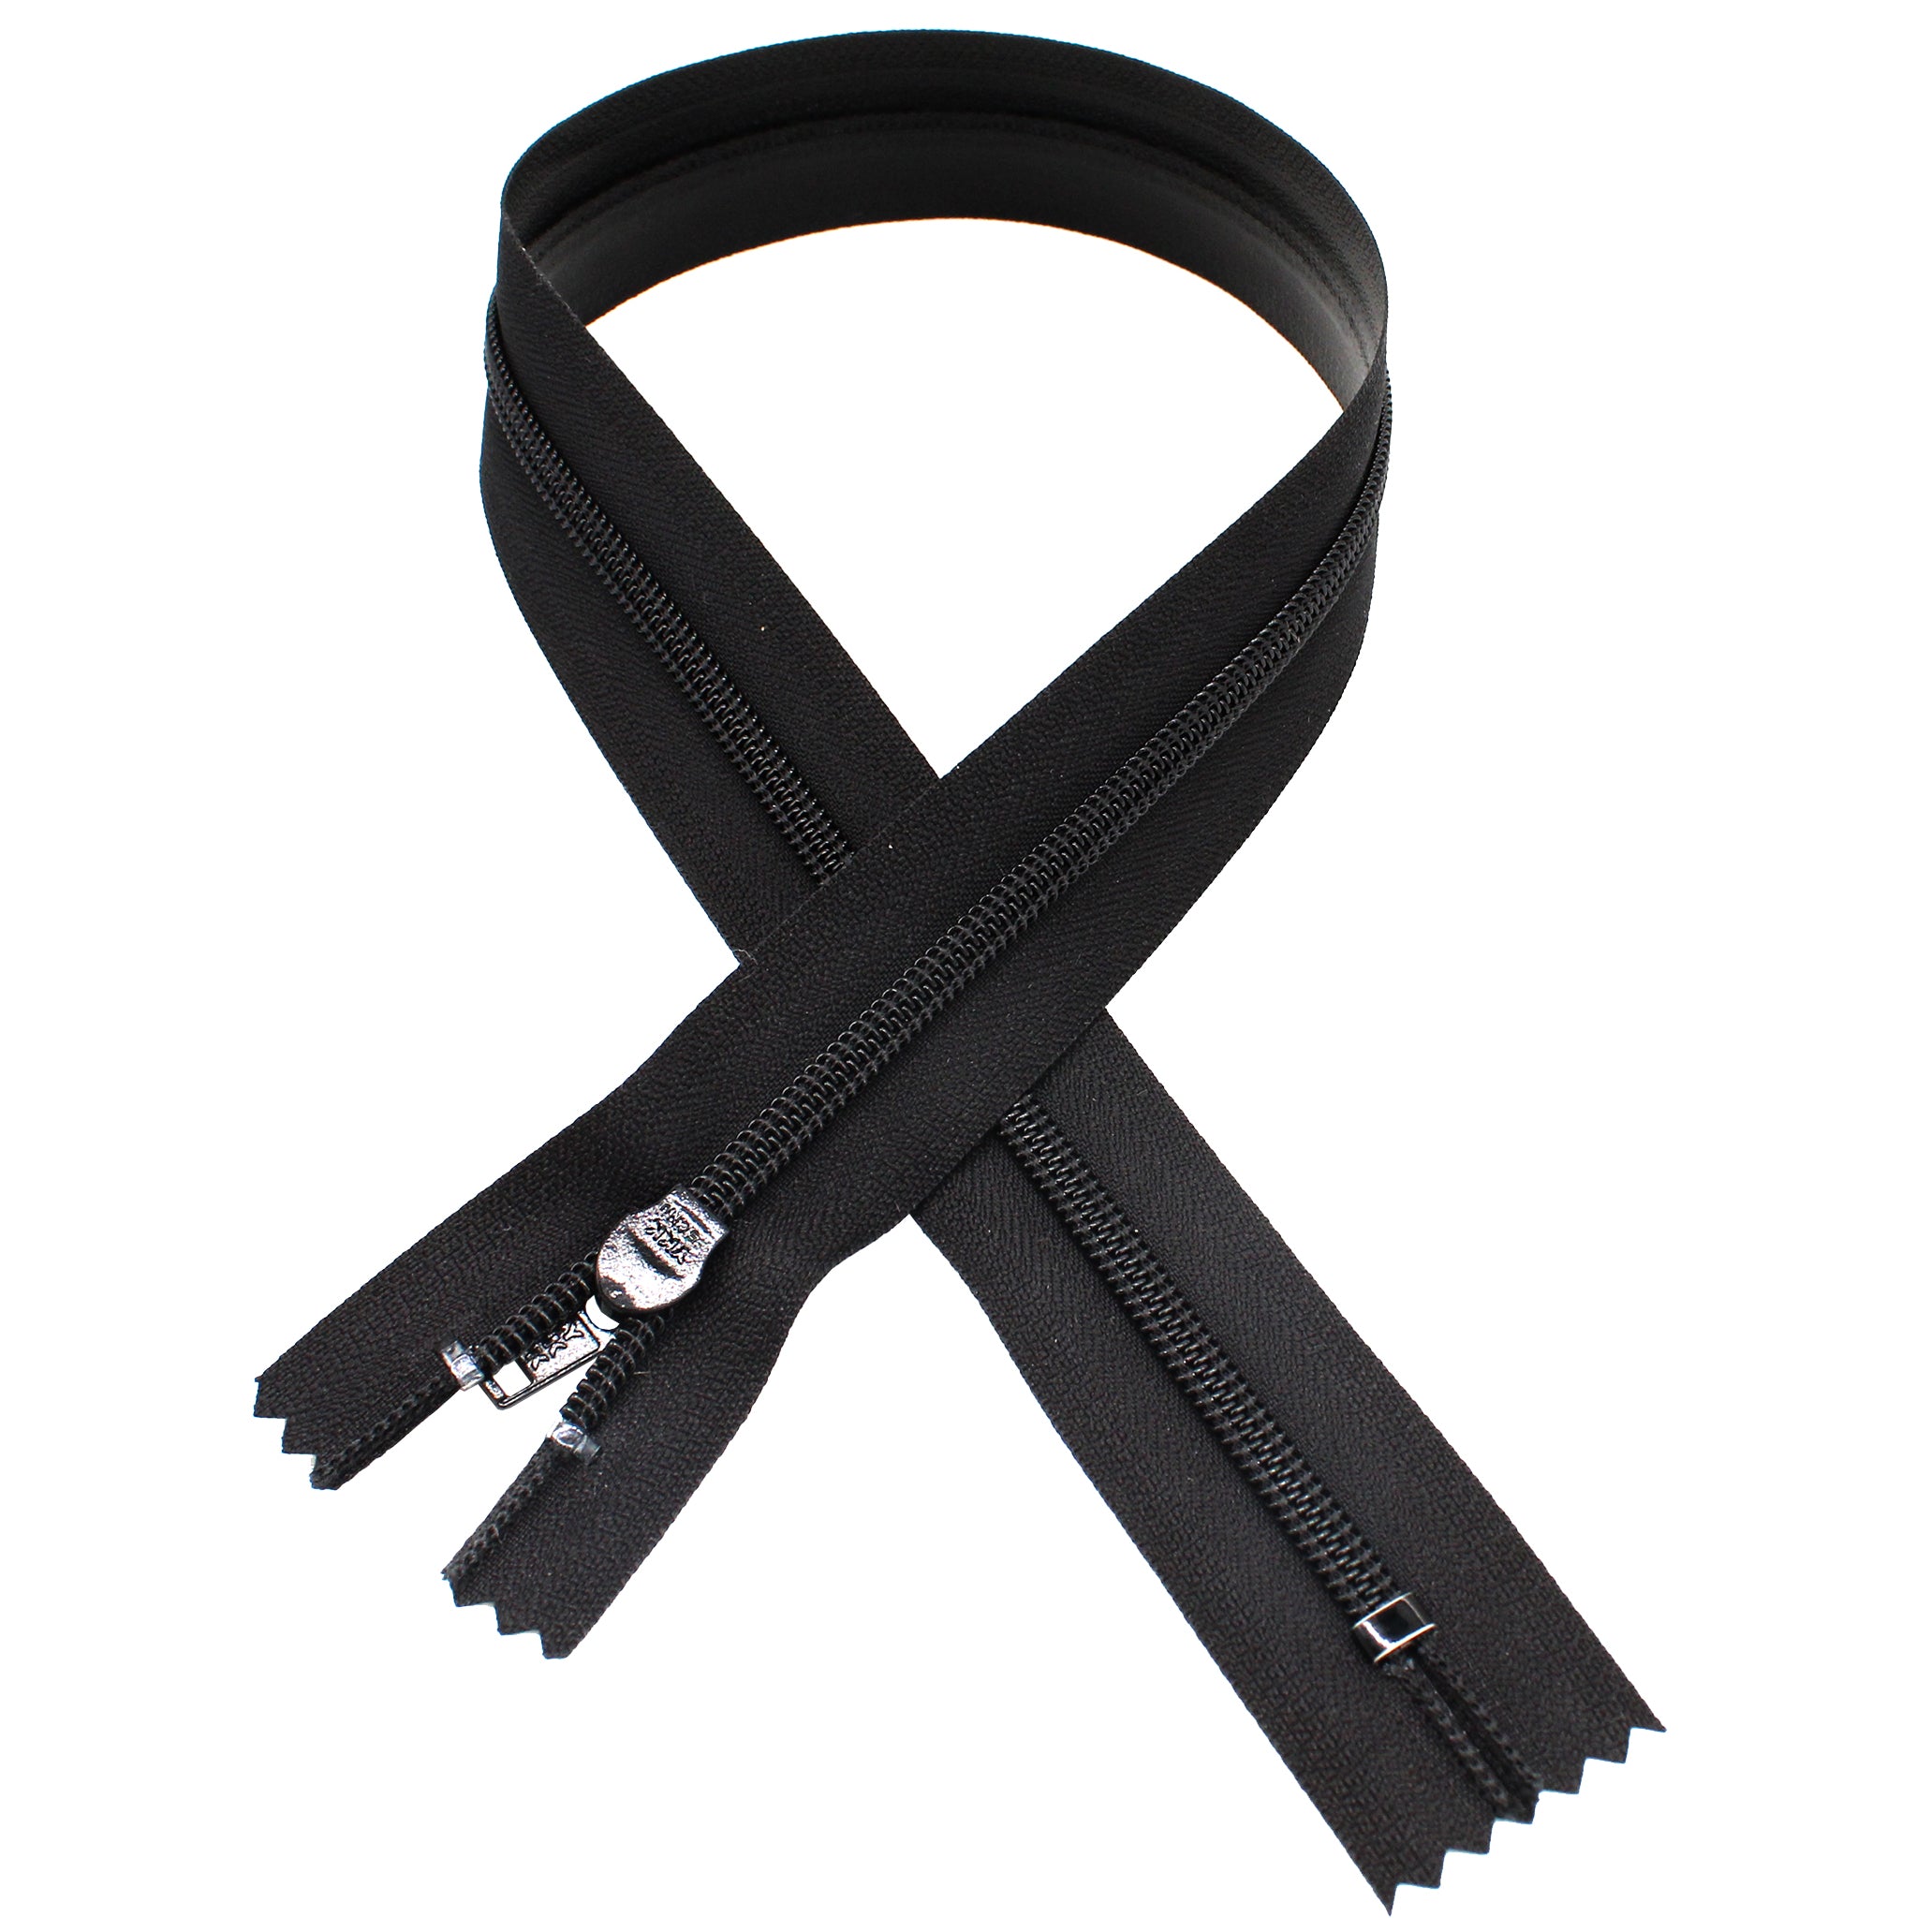 30inch - Aluminum Metal -Teeth Zipper - Number 5 - Separating - Black or  White Only - YKK Zippers - Excellent for Leather Jackets